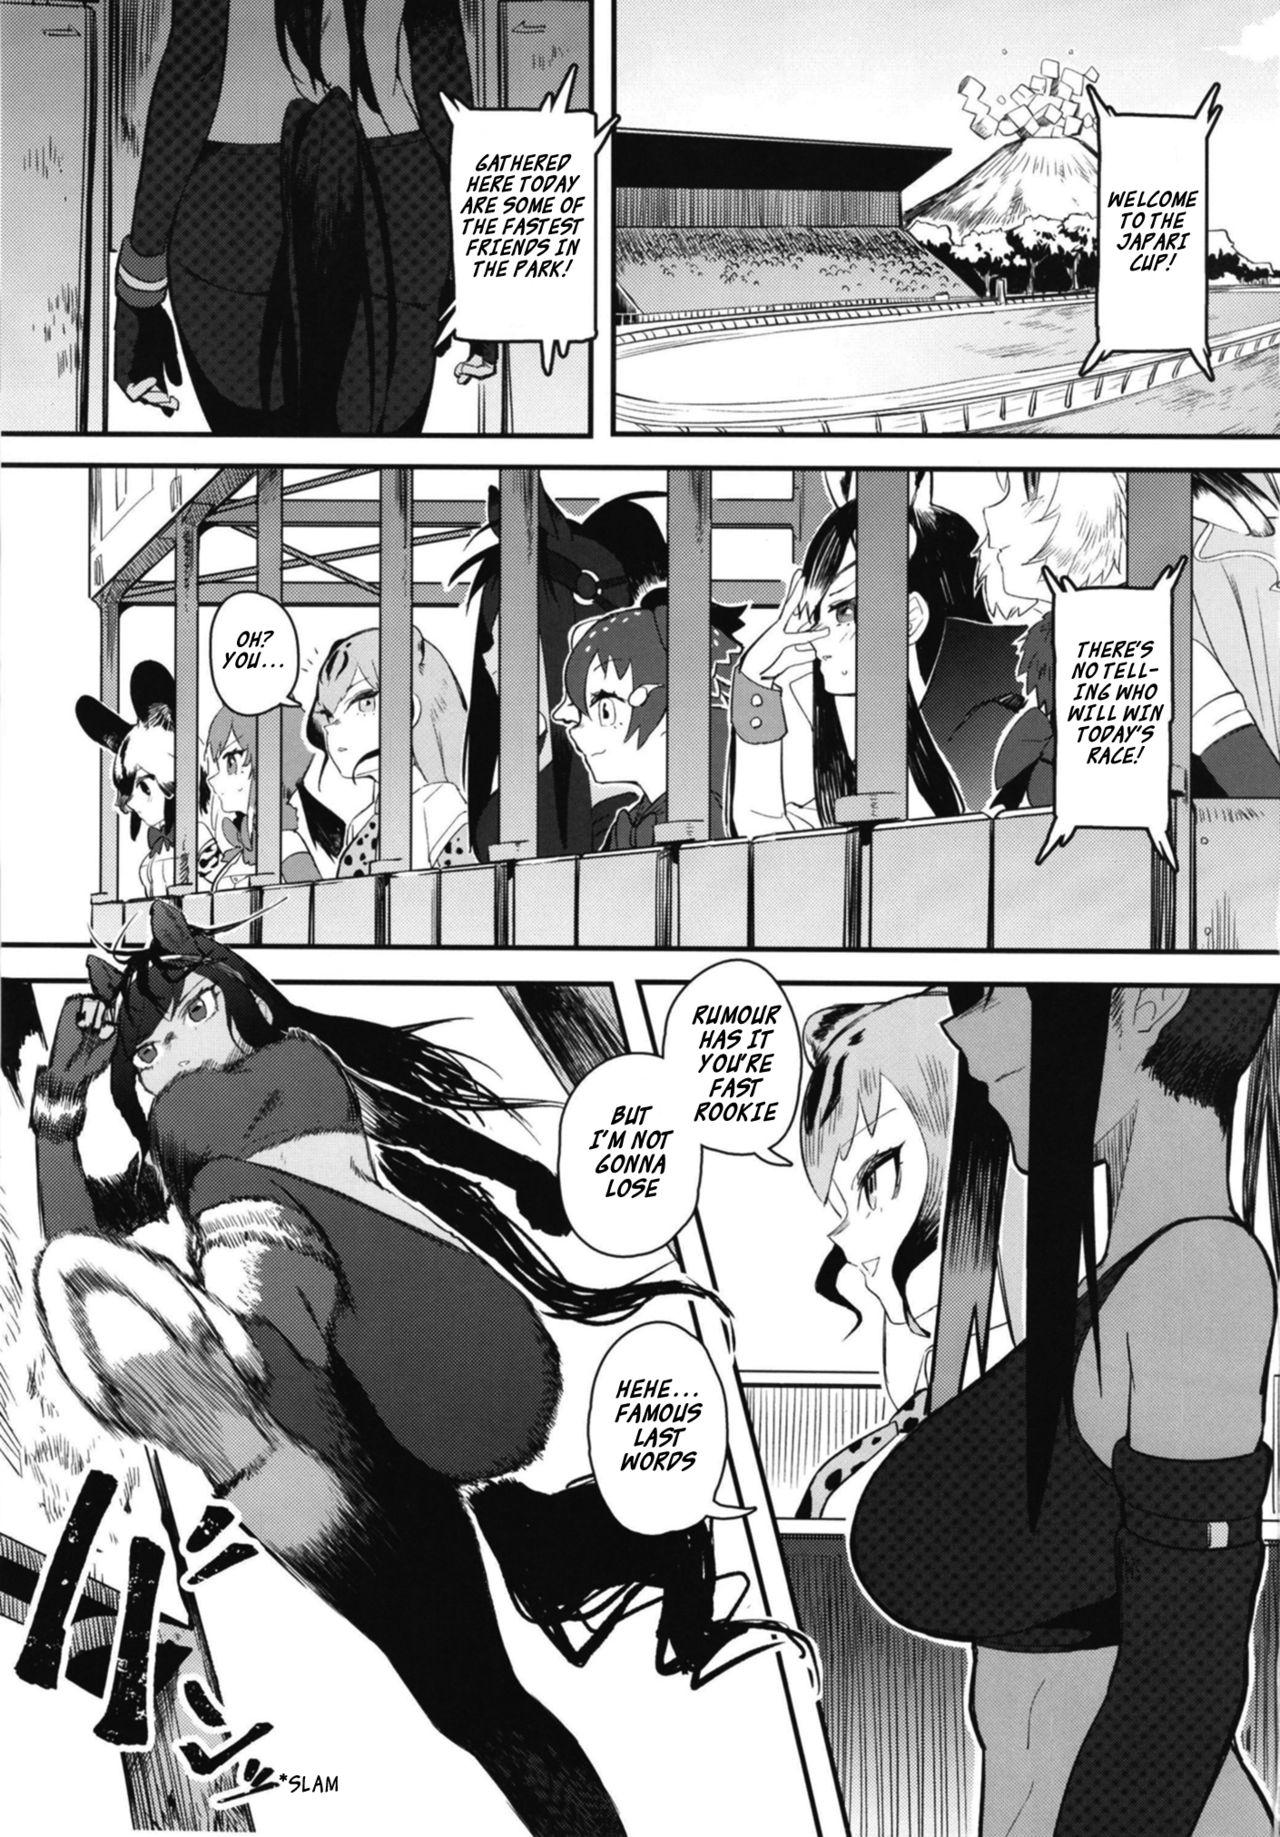 Rough Sex Porn Thoroughbred Early Days 2 - Kemono friends Plump - Page 3